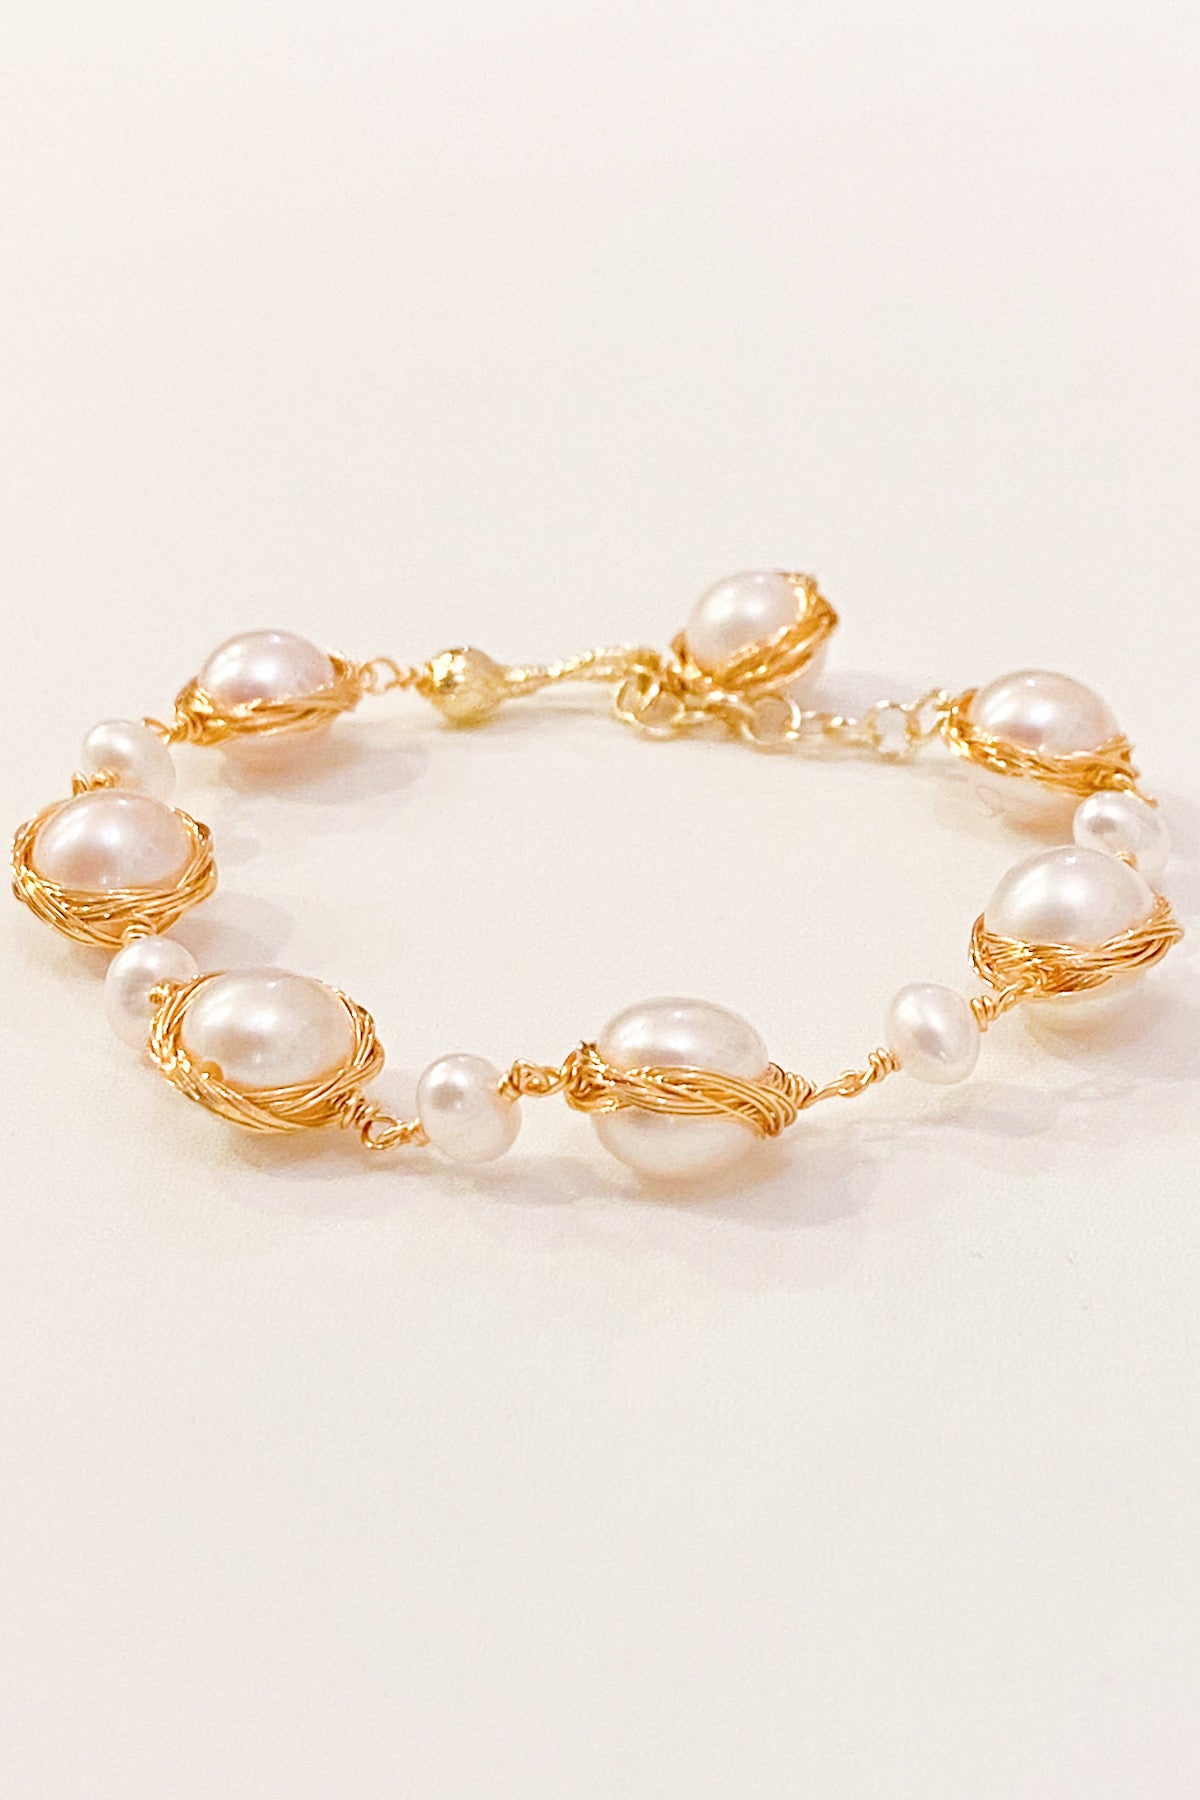 Amazon.com: EVOLS Pearl Jade Bracelet Green Stone Baroque Jewelry Gold Tone  Link Charm. Comes With A Custom Packaging. A Wonderful Gift for Her For All  Occasions.: Clothing, Shoes & Jewelry